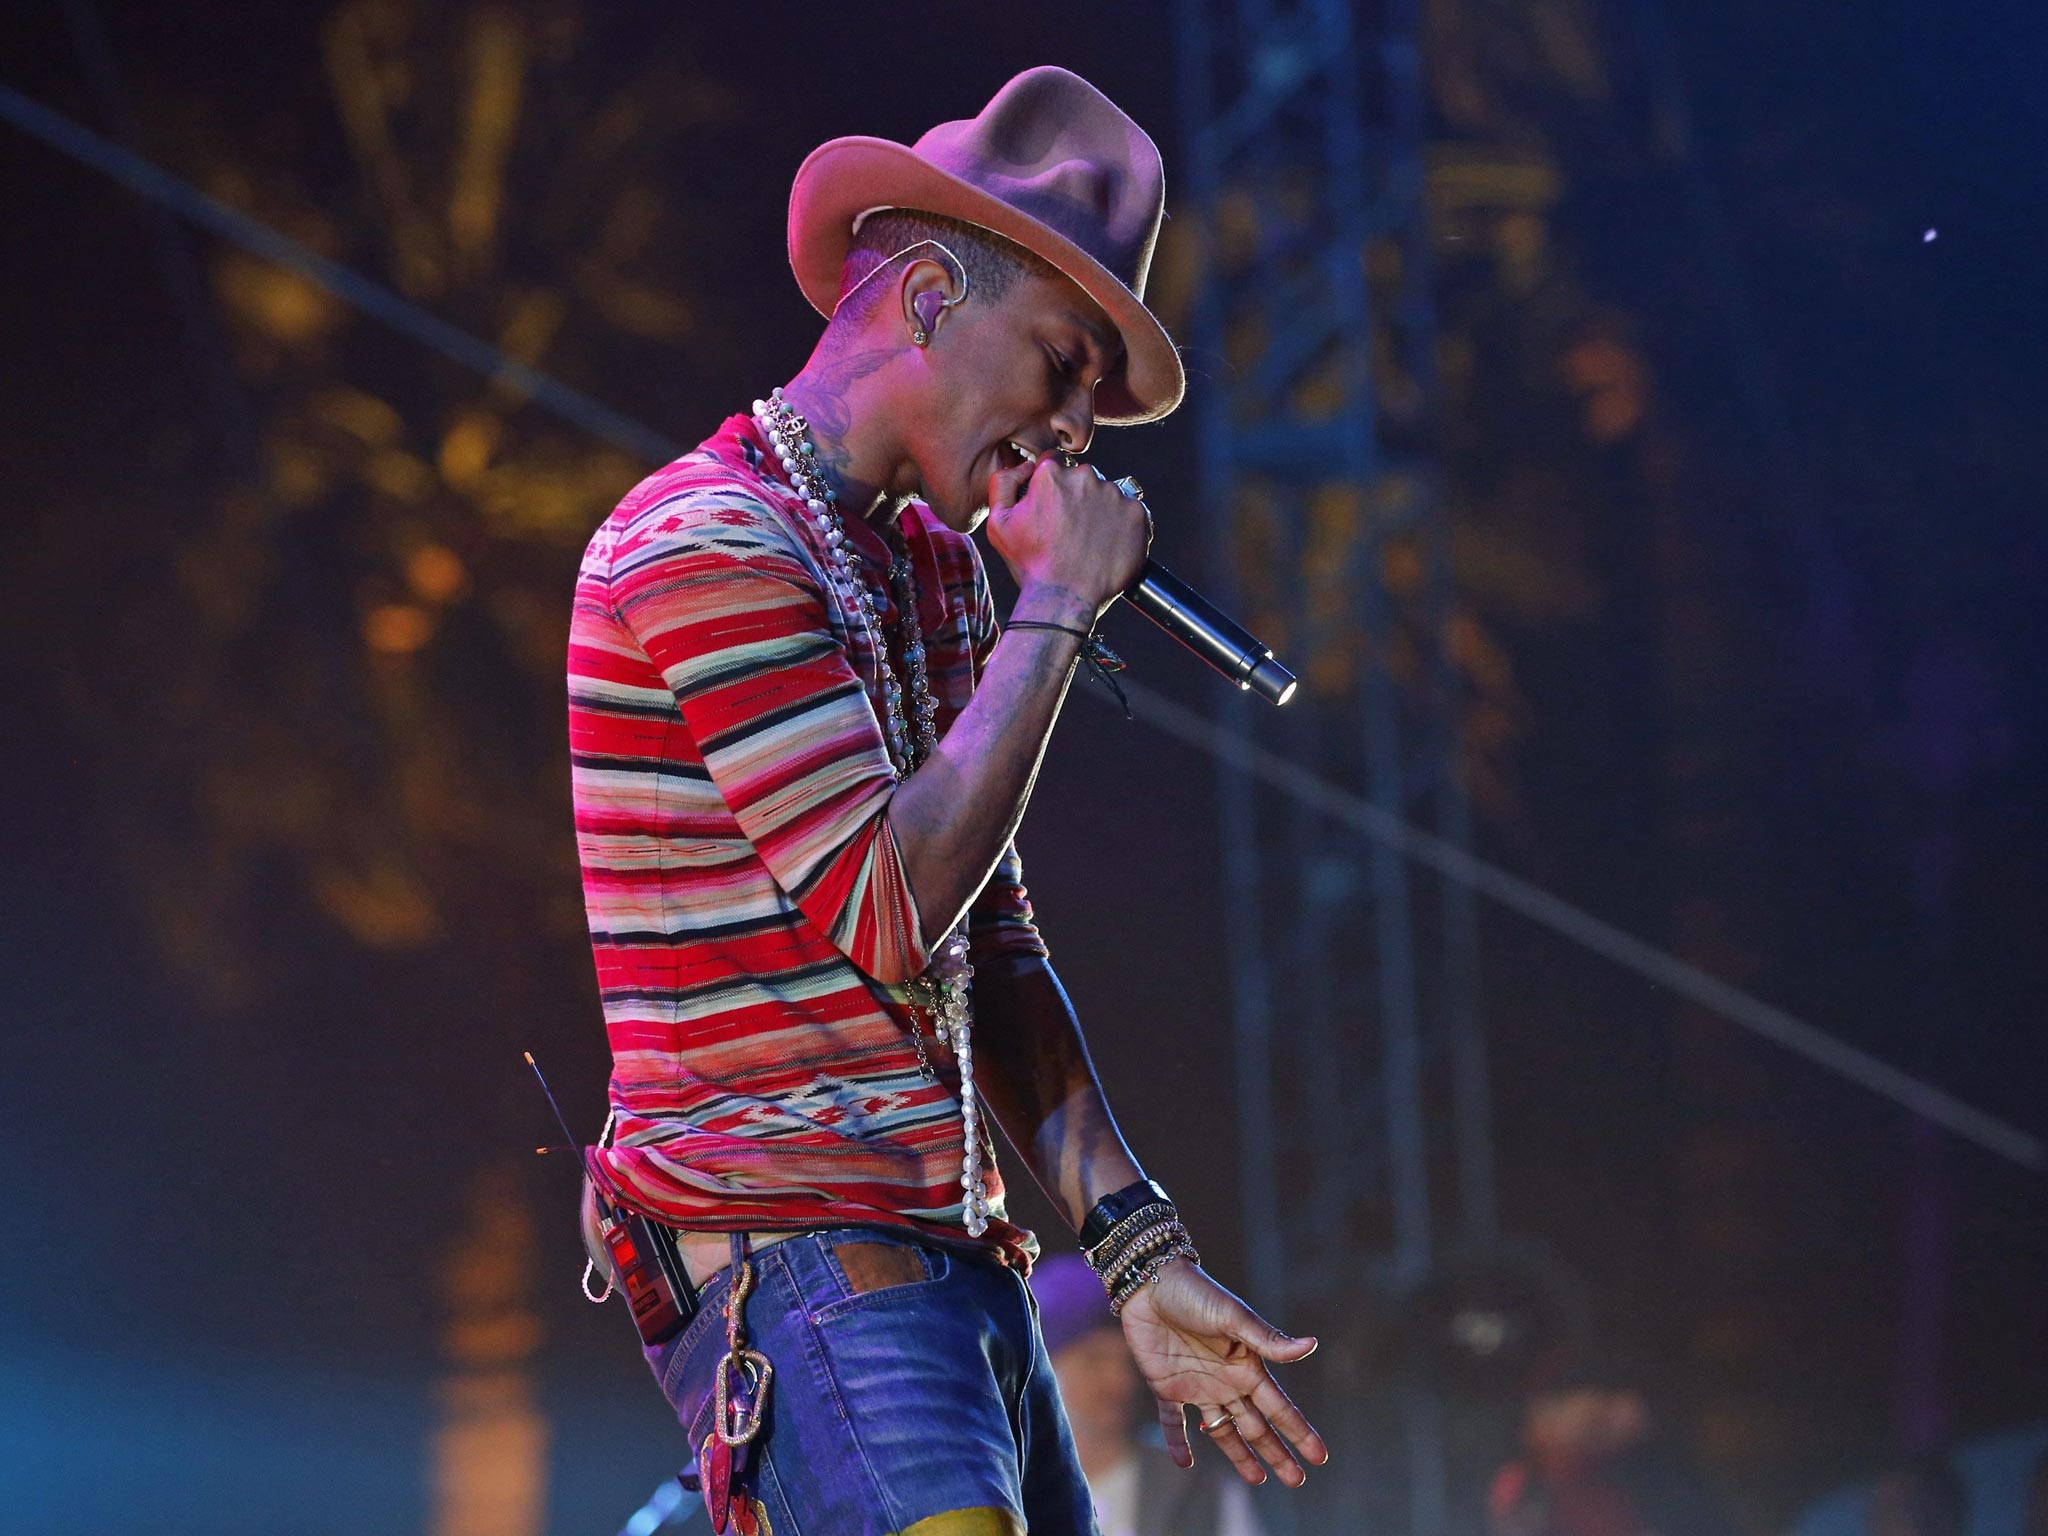 Pharrell Williams performing his set at day 2 of the Coachella Festival